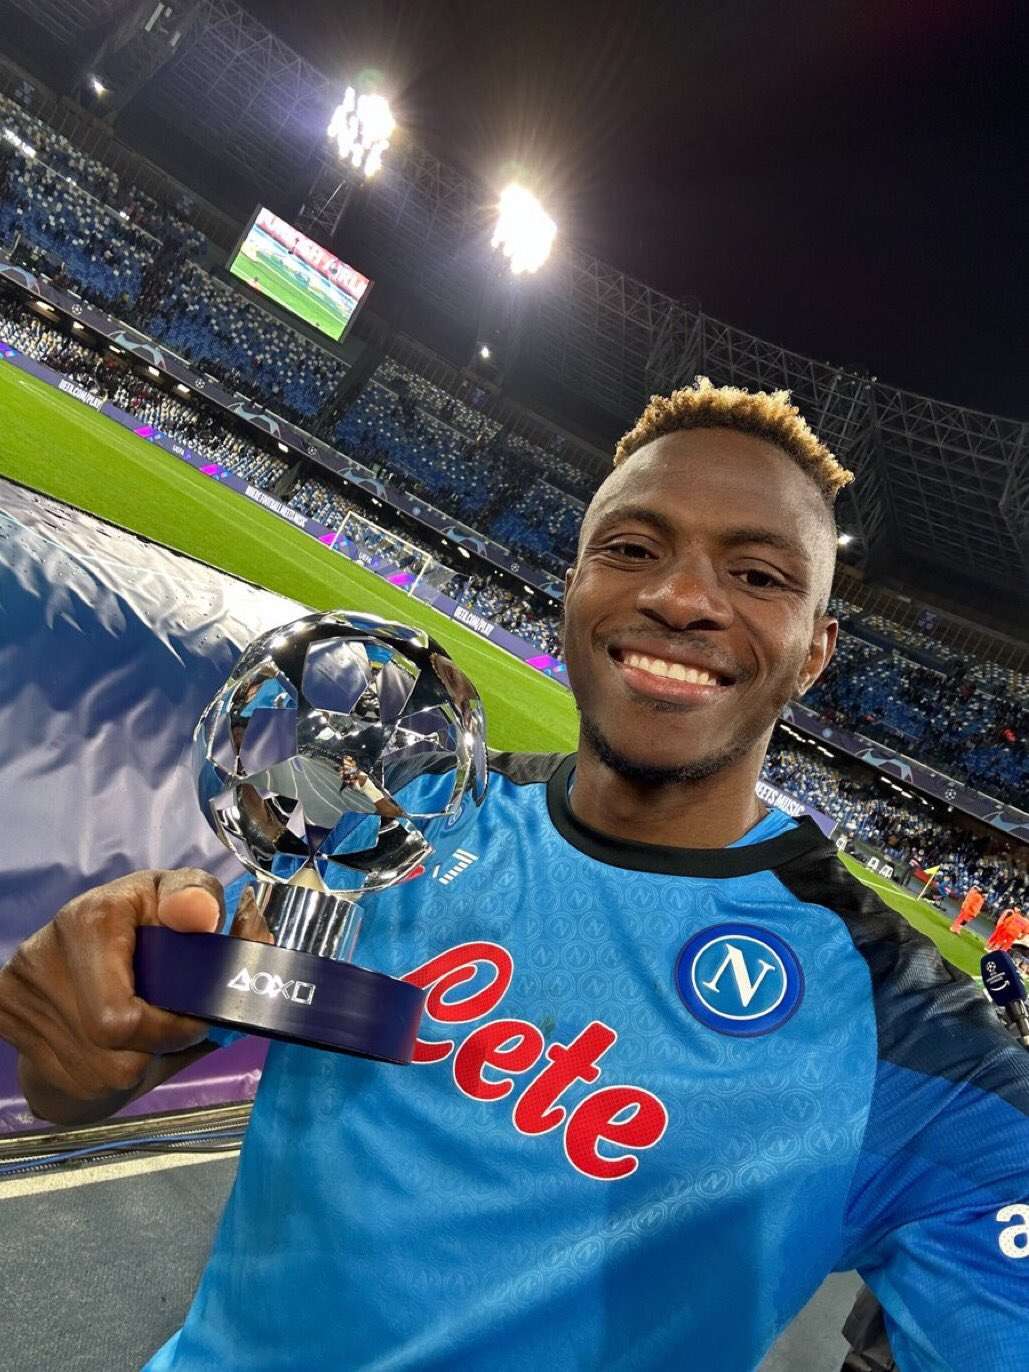 Osimhen "It's My Dream To Win African Best Player Award"